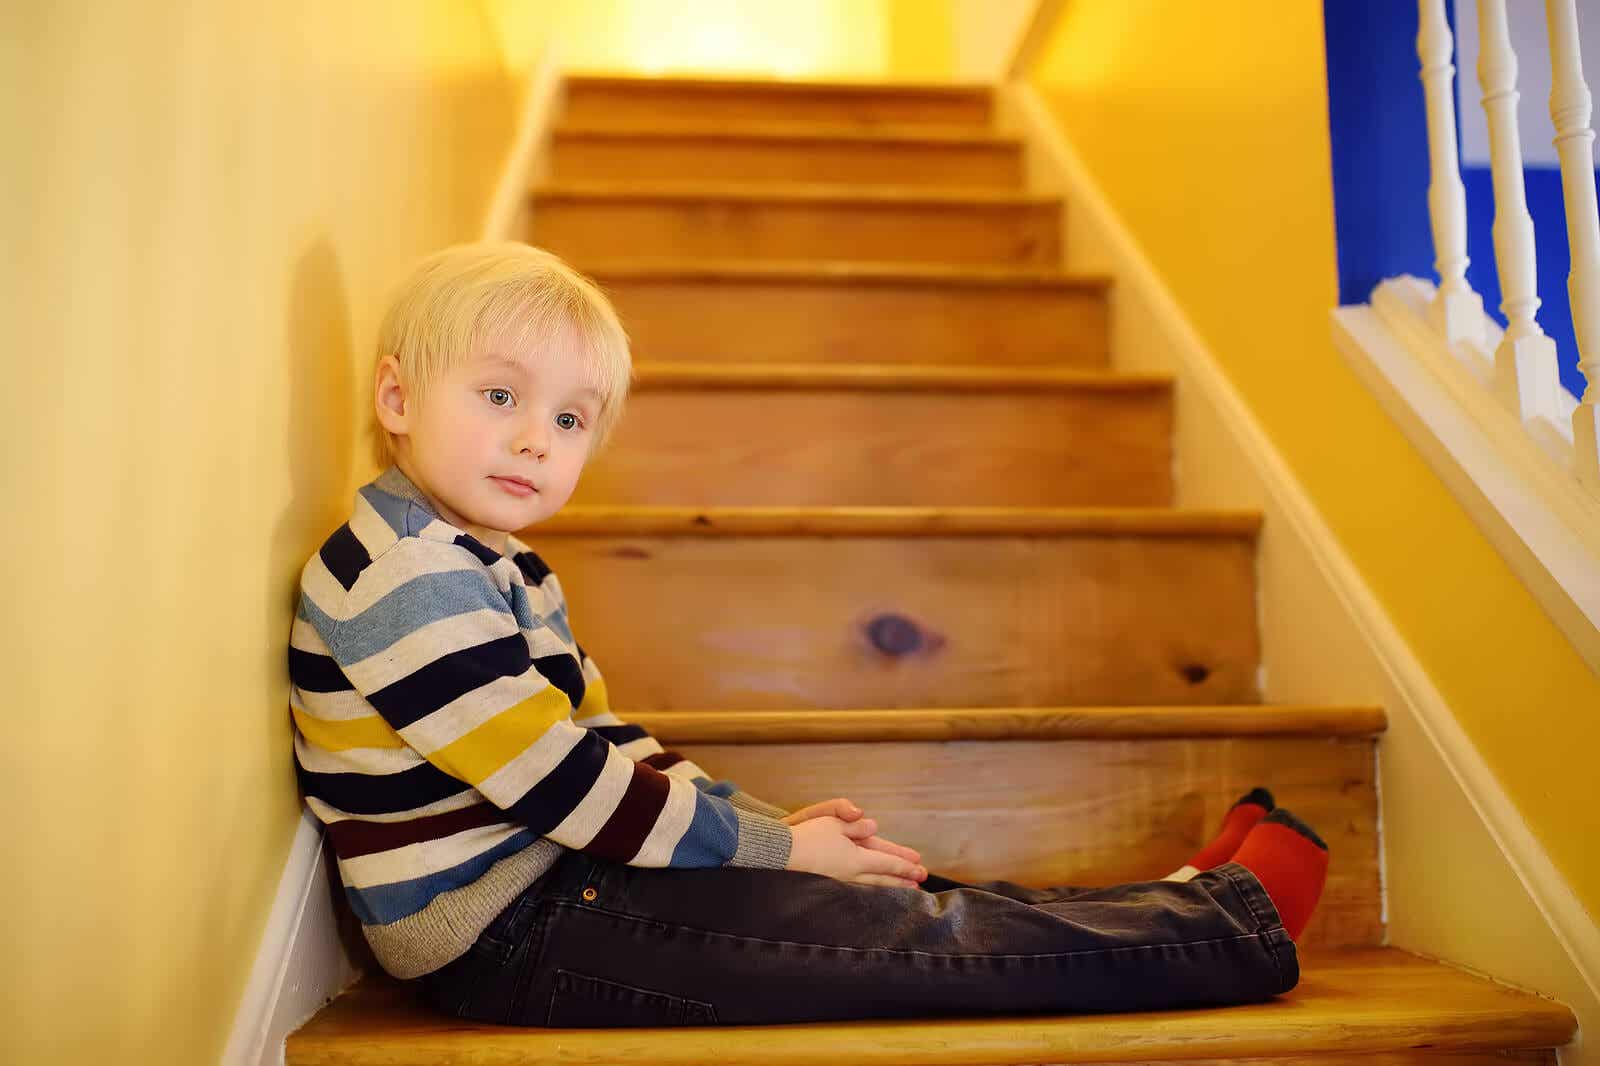 A child sitting on a staircase.